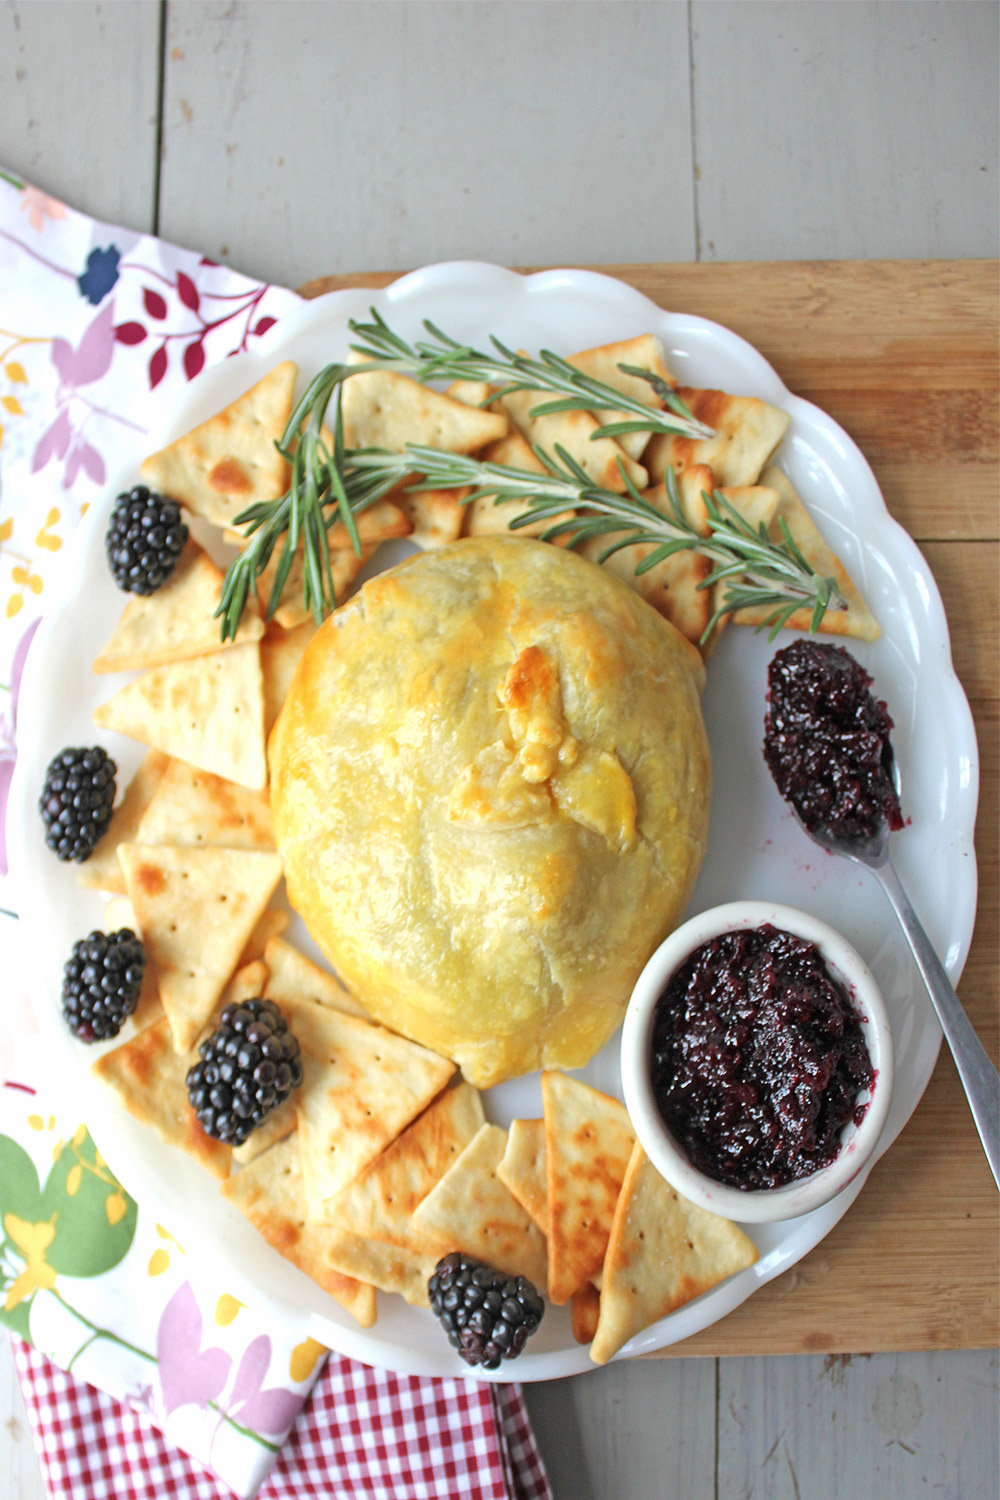 Uncut baked brie and berries with jam on platter garnished with fresh blackberries, rosemary and blackberry bourbon jam.